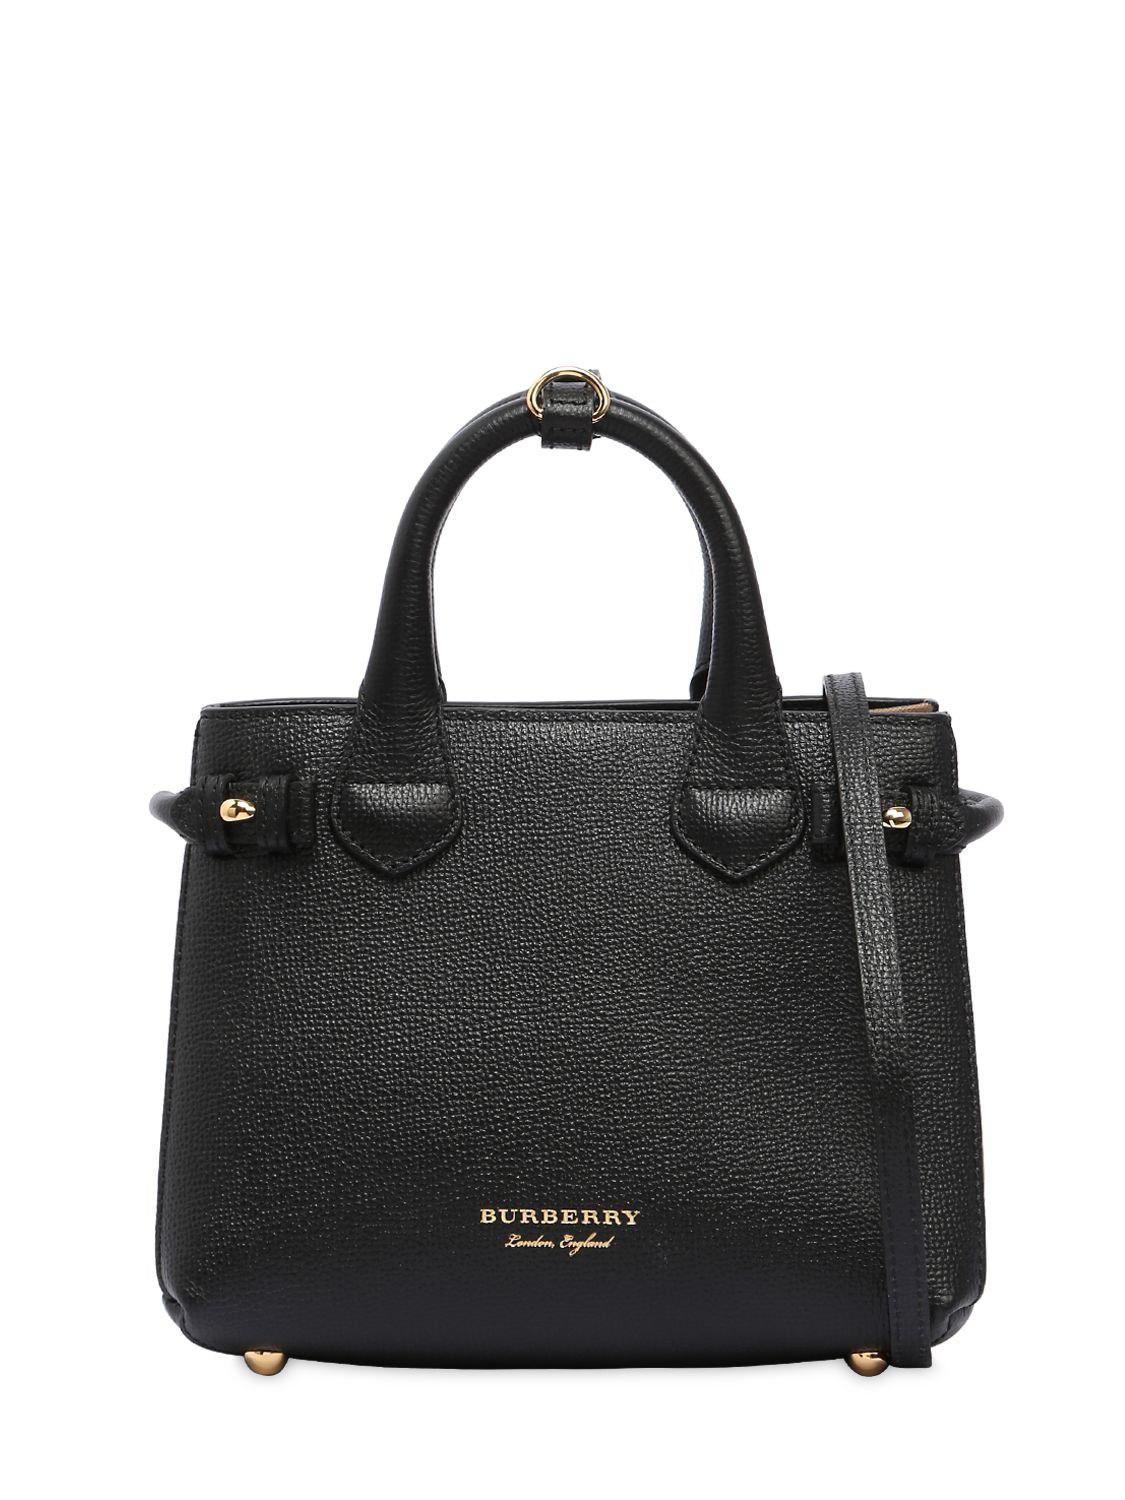 Burberry Baby Banner Leather & House Check Bag in Black | Lyst